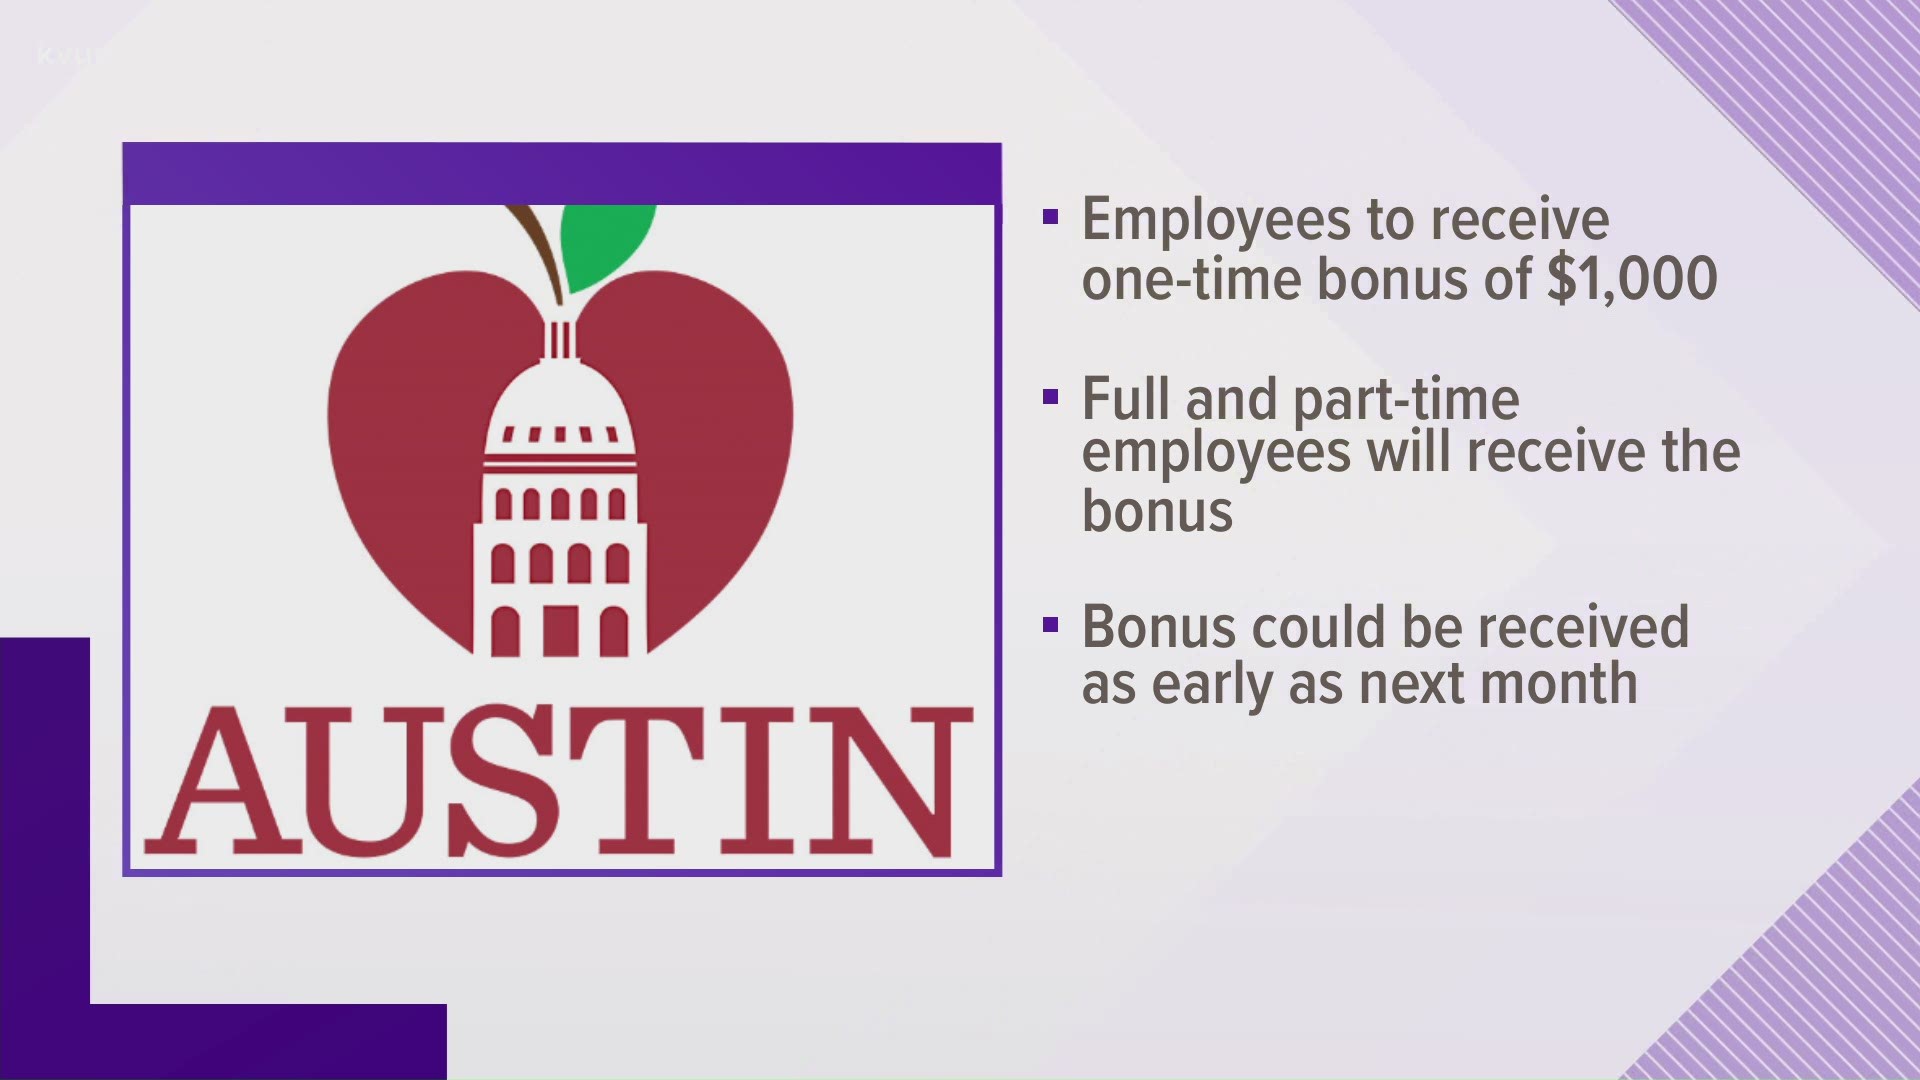 Both part-time and full-time employees will receive $1,000 as early as March.